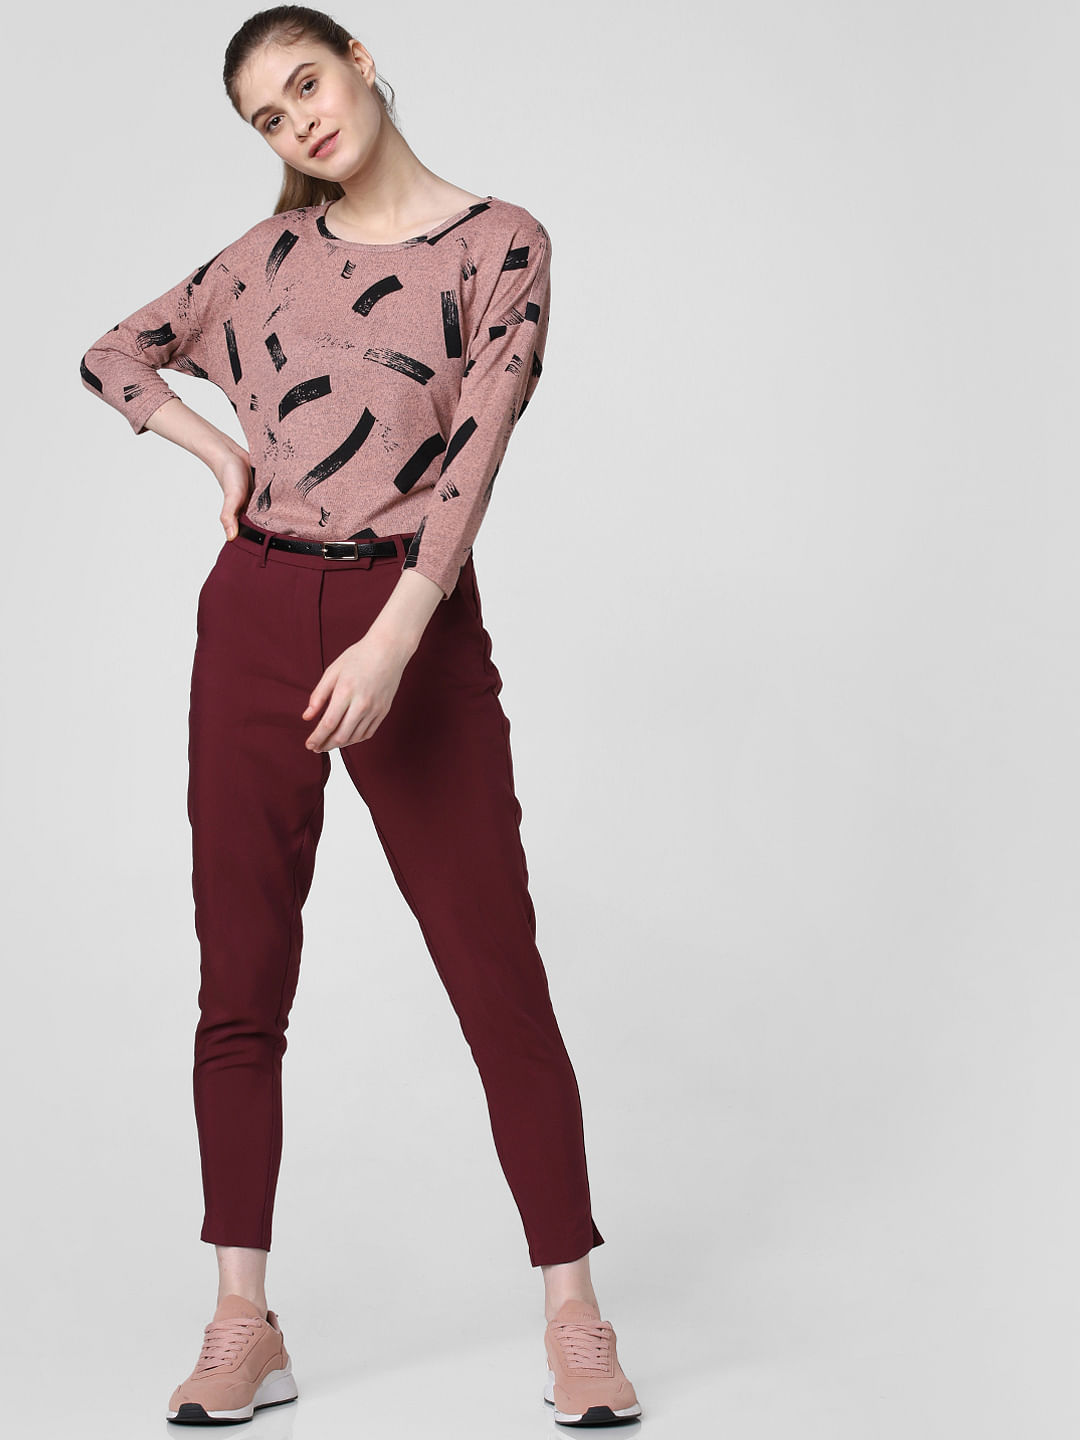 Buy Buynewtrend Carrera Full Length Women Formal Trousers and Pants 28  Maroon at Amazonin